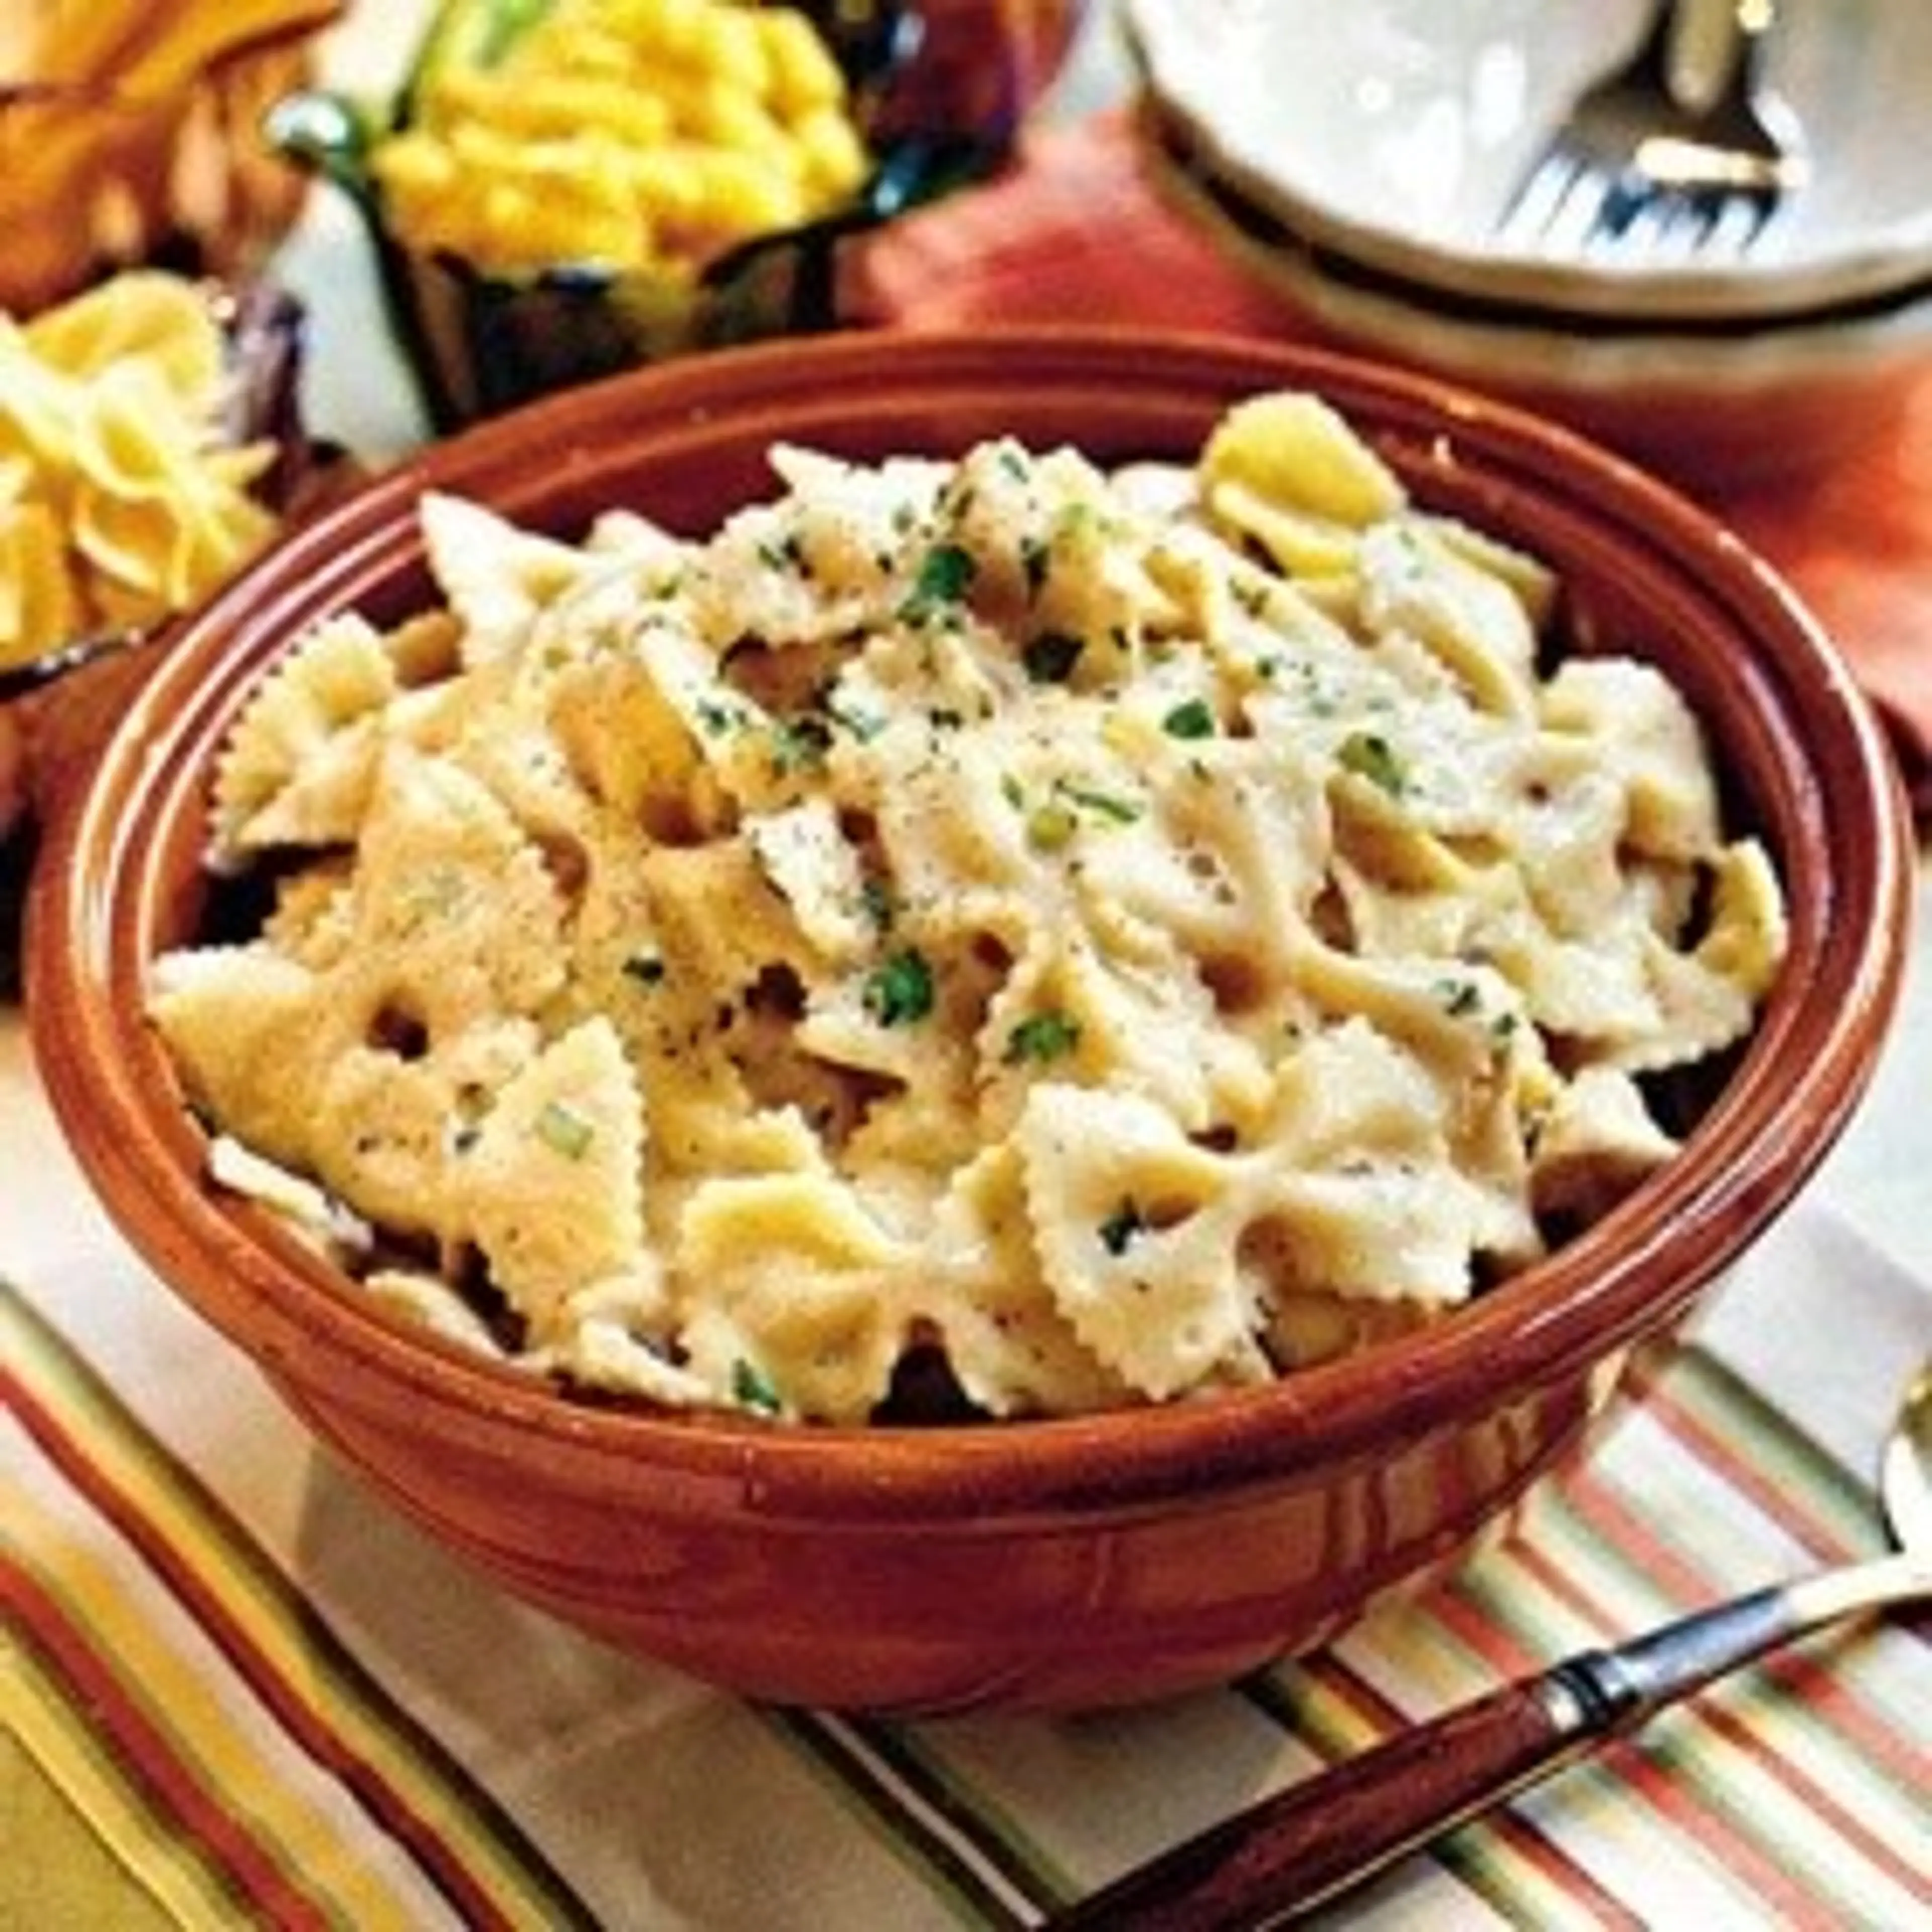 Chicken and Bow Tie Pasta